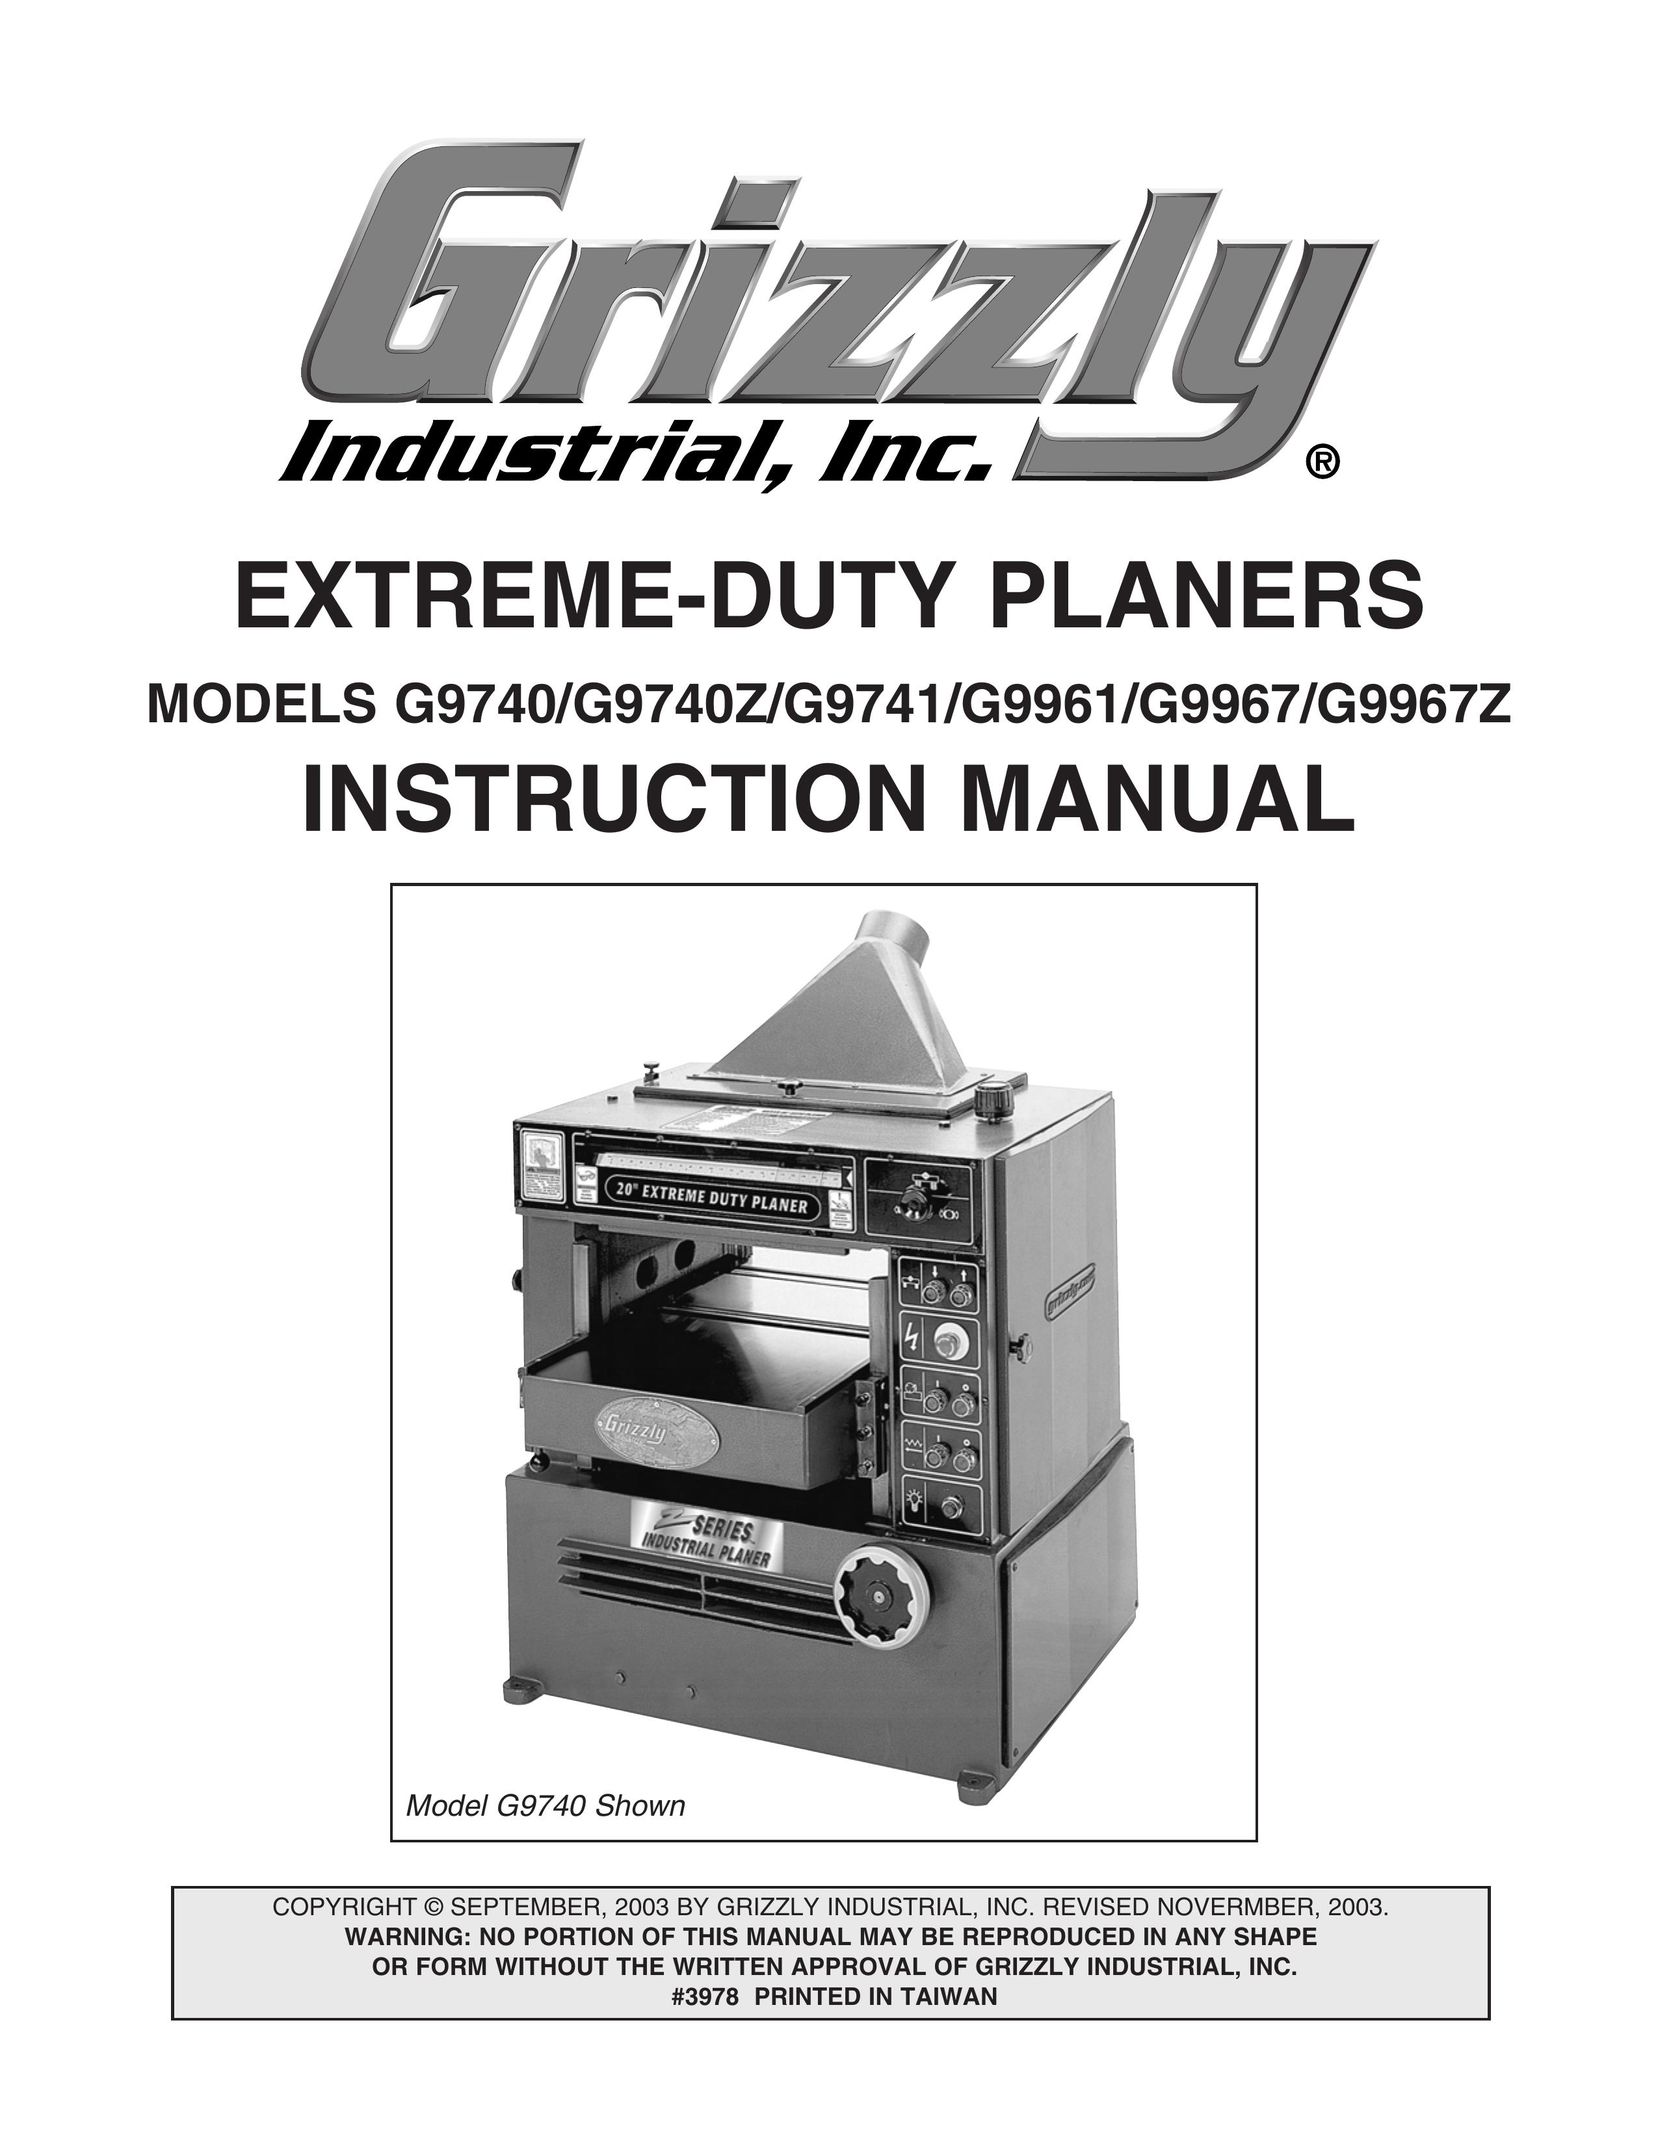 Grizzly G9740 Planer User Manual